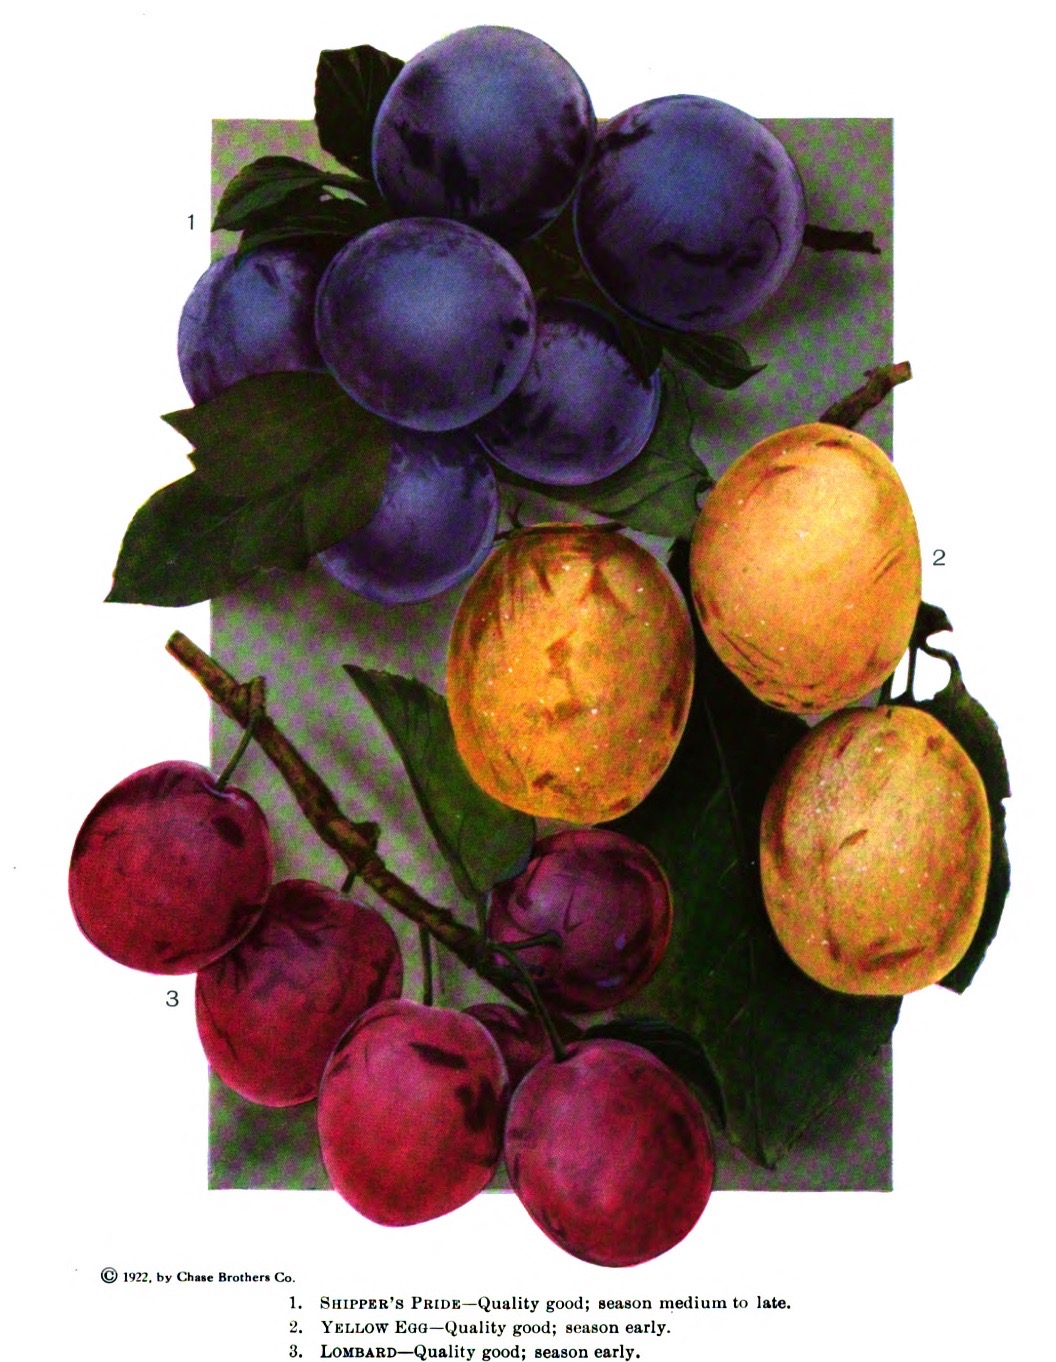 Illustration of three varieties of plums that are three different colors: purple Shipper’s Pride, yellow Yellow Egg, and red Lombard.